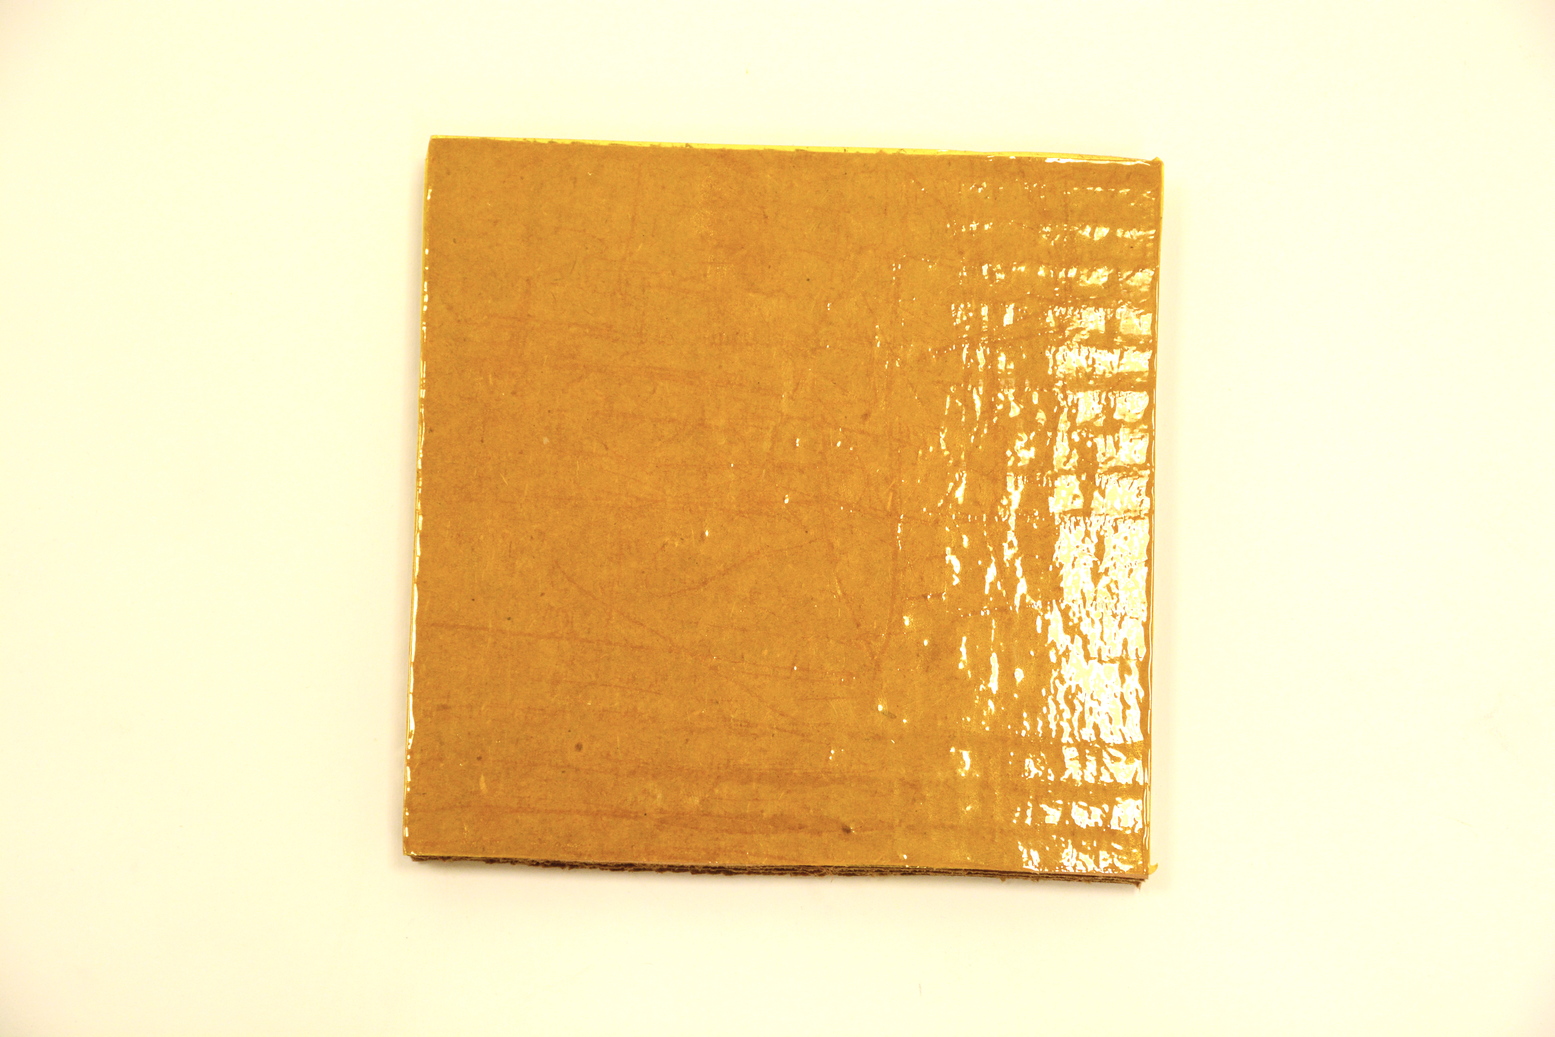 A sample cardboard square with a shiny yellow finish of Kapton tape.